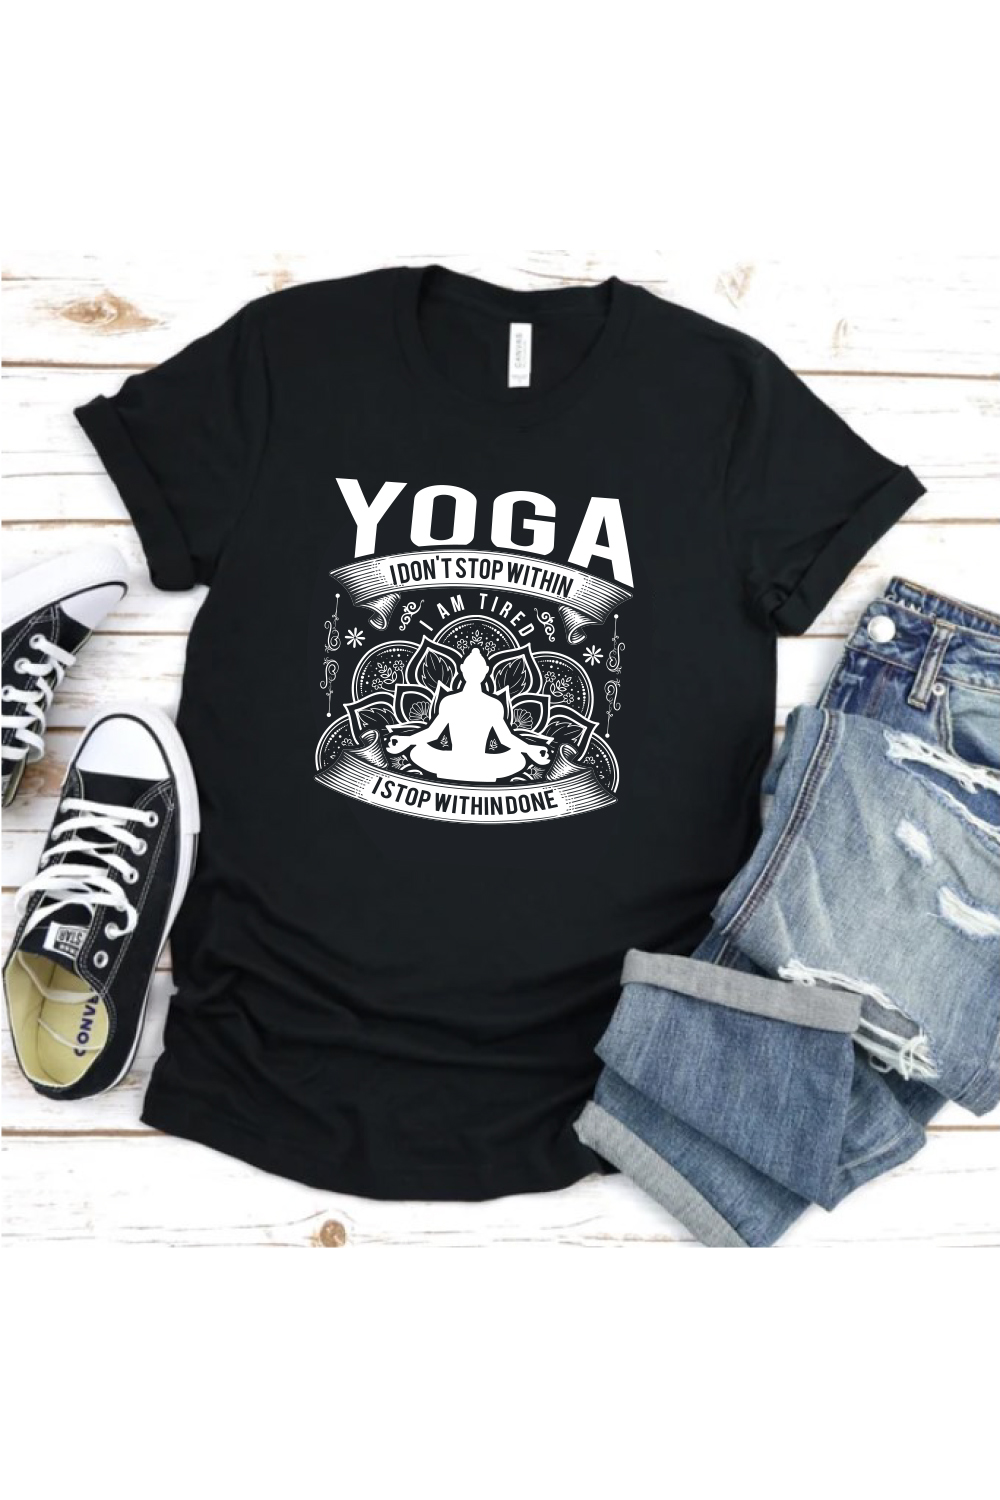 yoga i dont stop within i am tired I stop within done pinterest preview image.